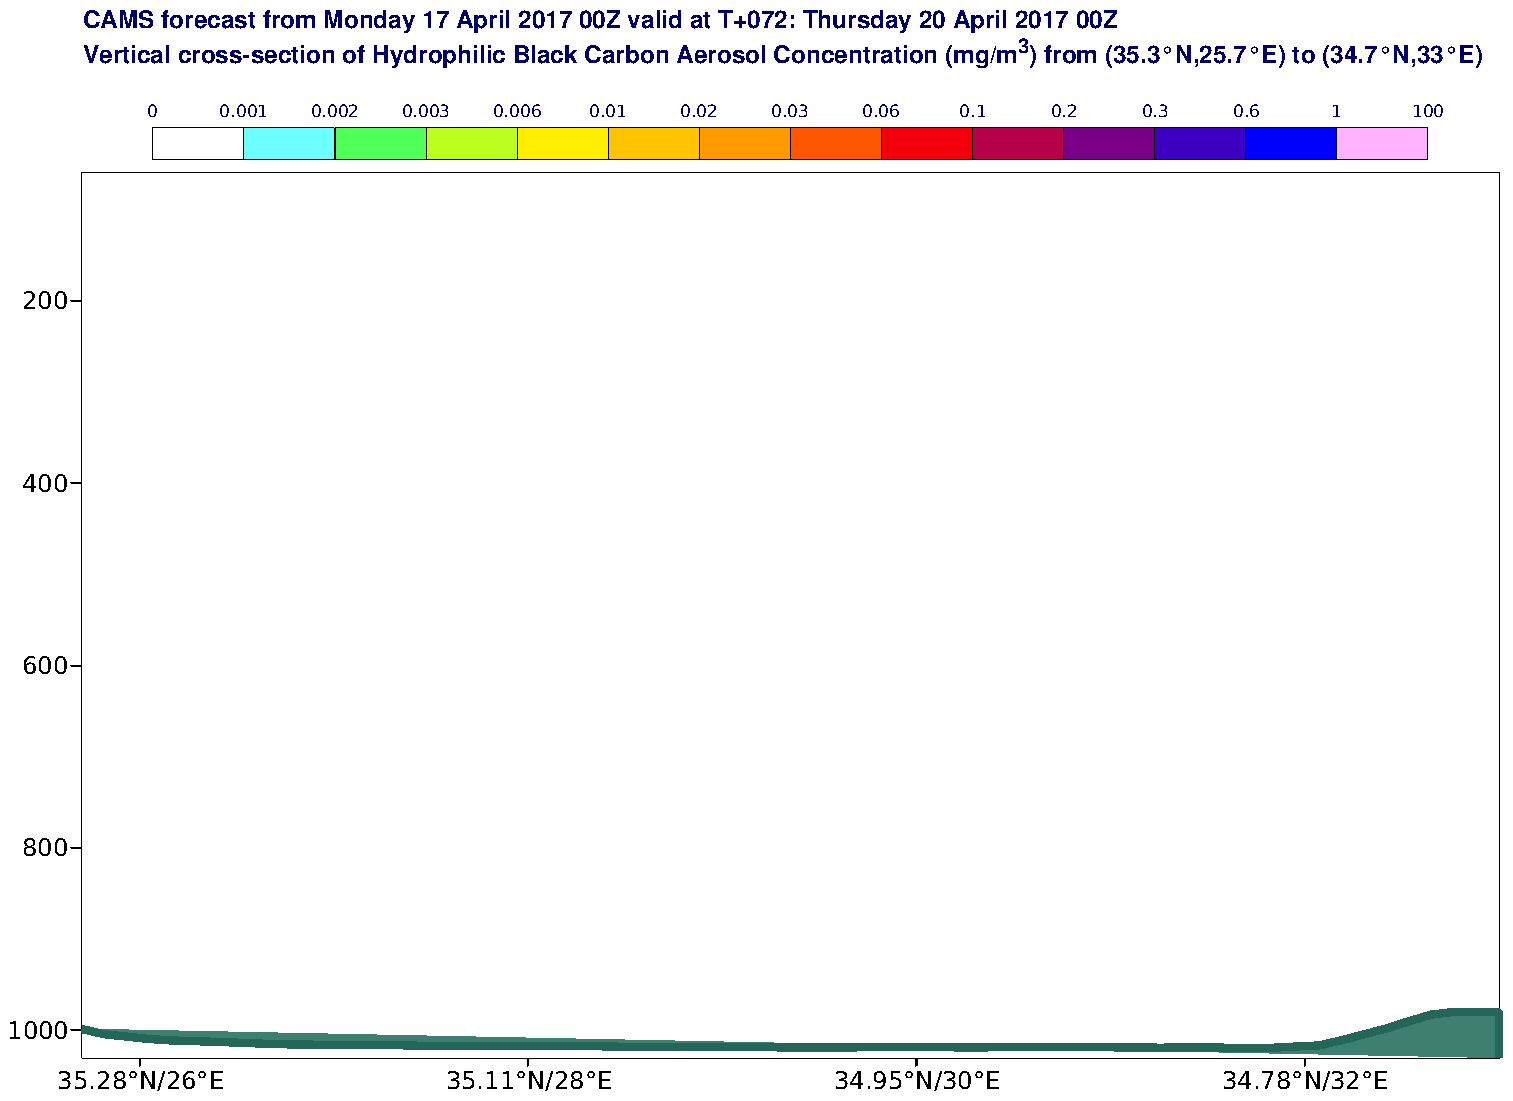 Vertical cross-section of Hydrophilic Black Carbon Aerosol Concentration (mg/m3) valid at T72 - 2017-04-20 00:00